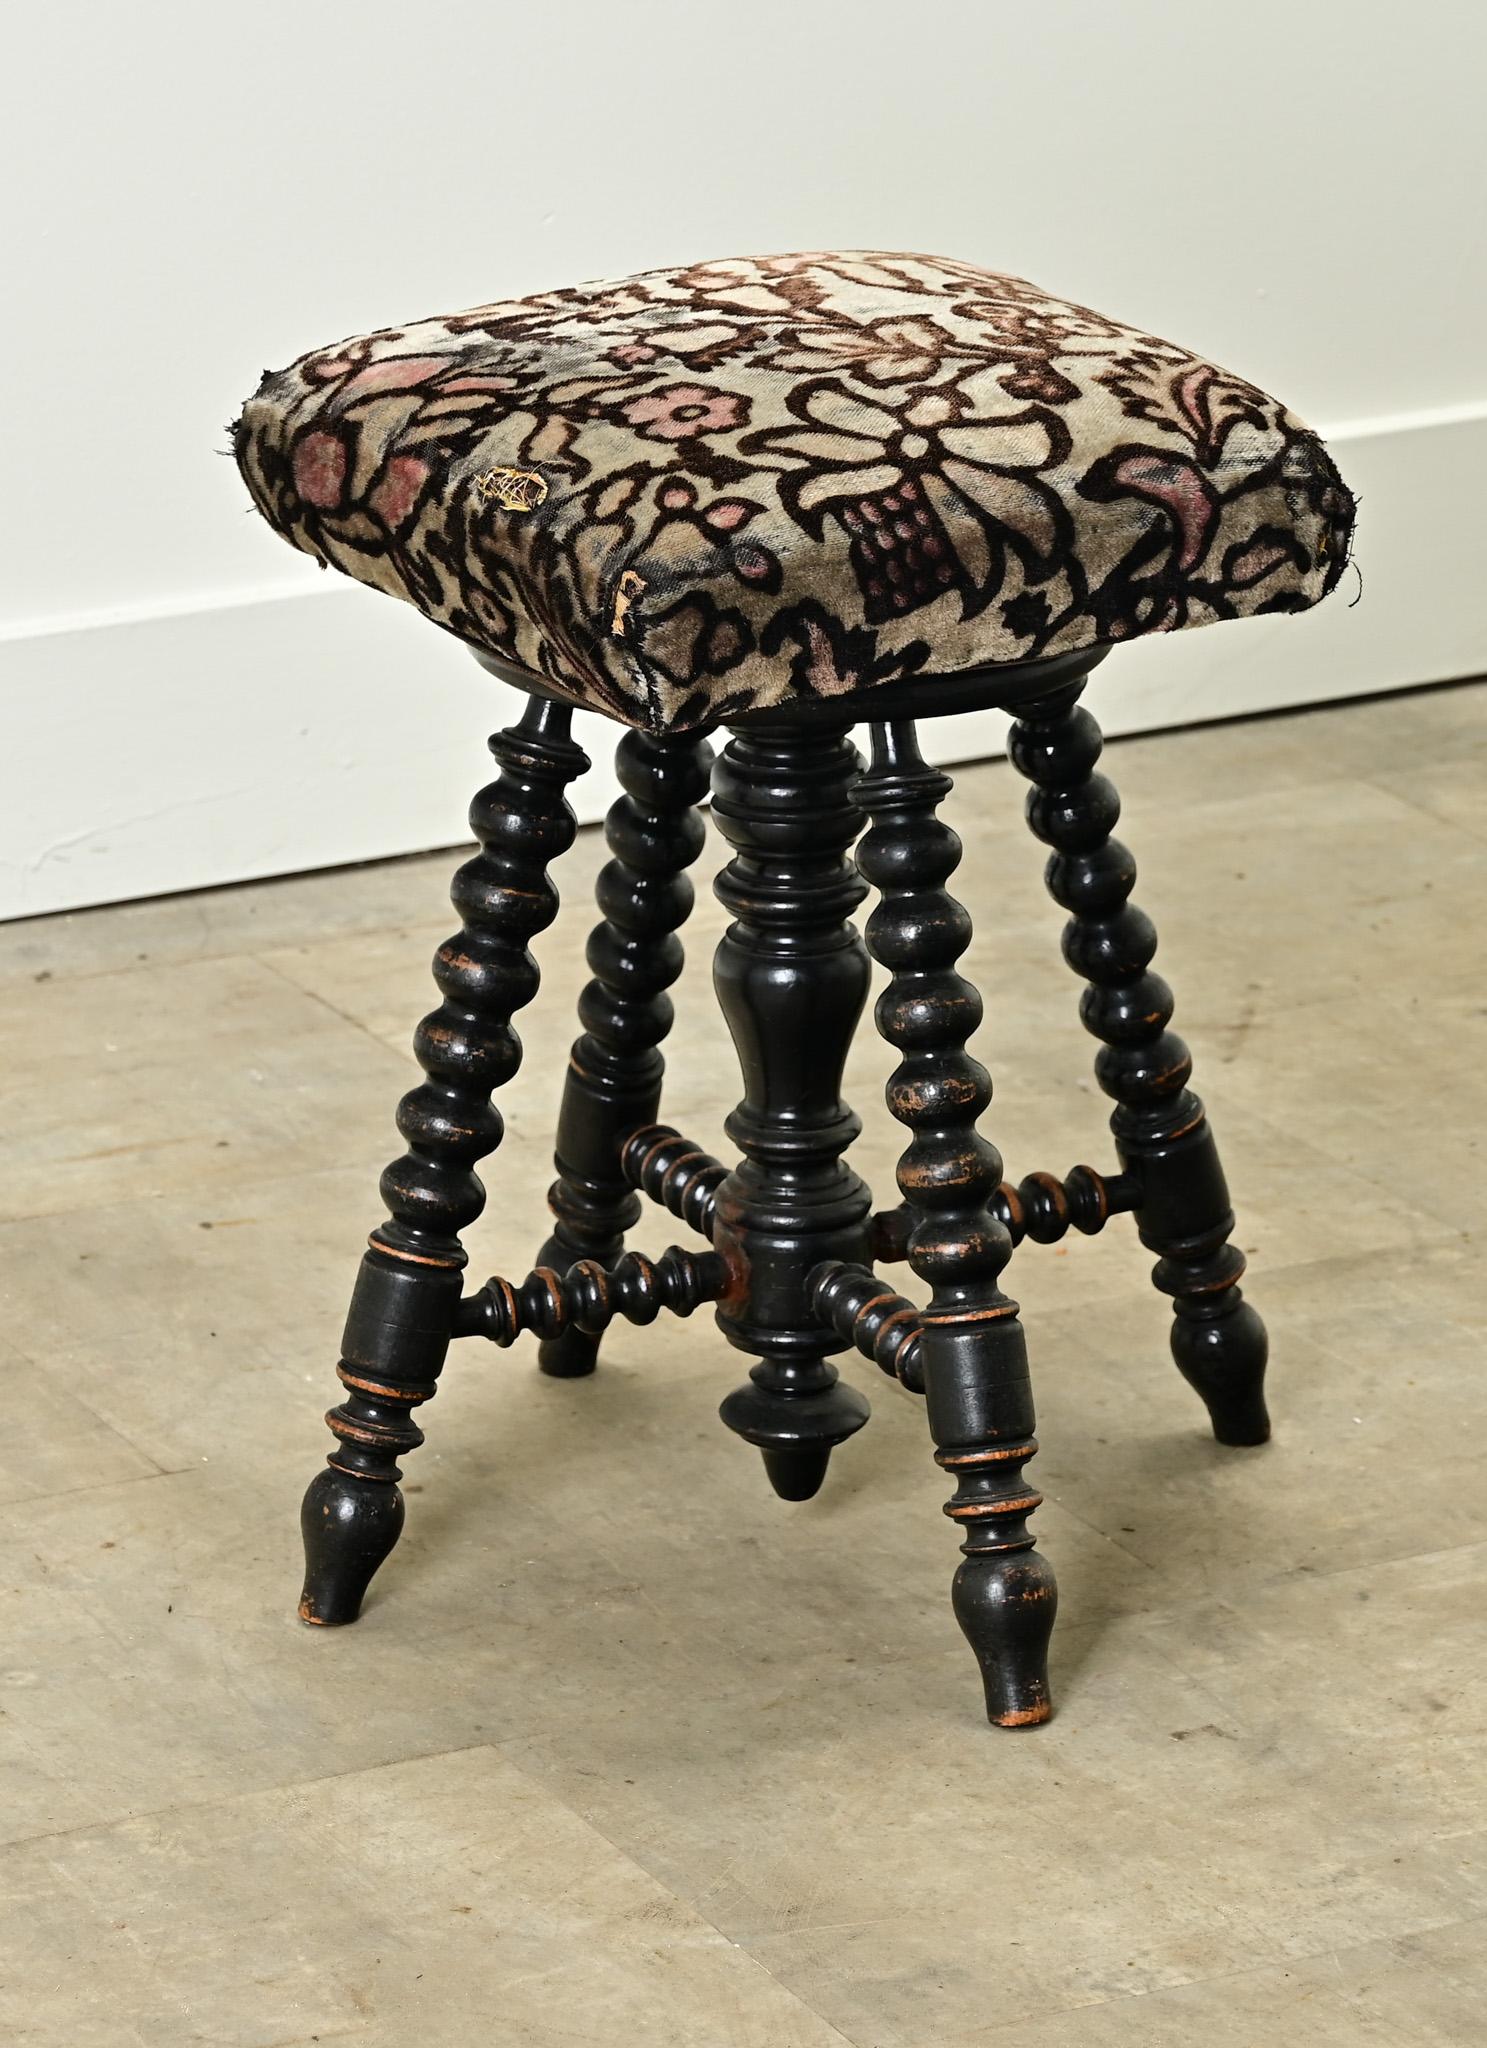 A charming upholstered and ebonized piano stool made in France. The top cushion is upholstered in a worn floral-print velvet that compliments the ebonized wooden frame. The center of the stool has a hidden steel screw used to raise and lower the